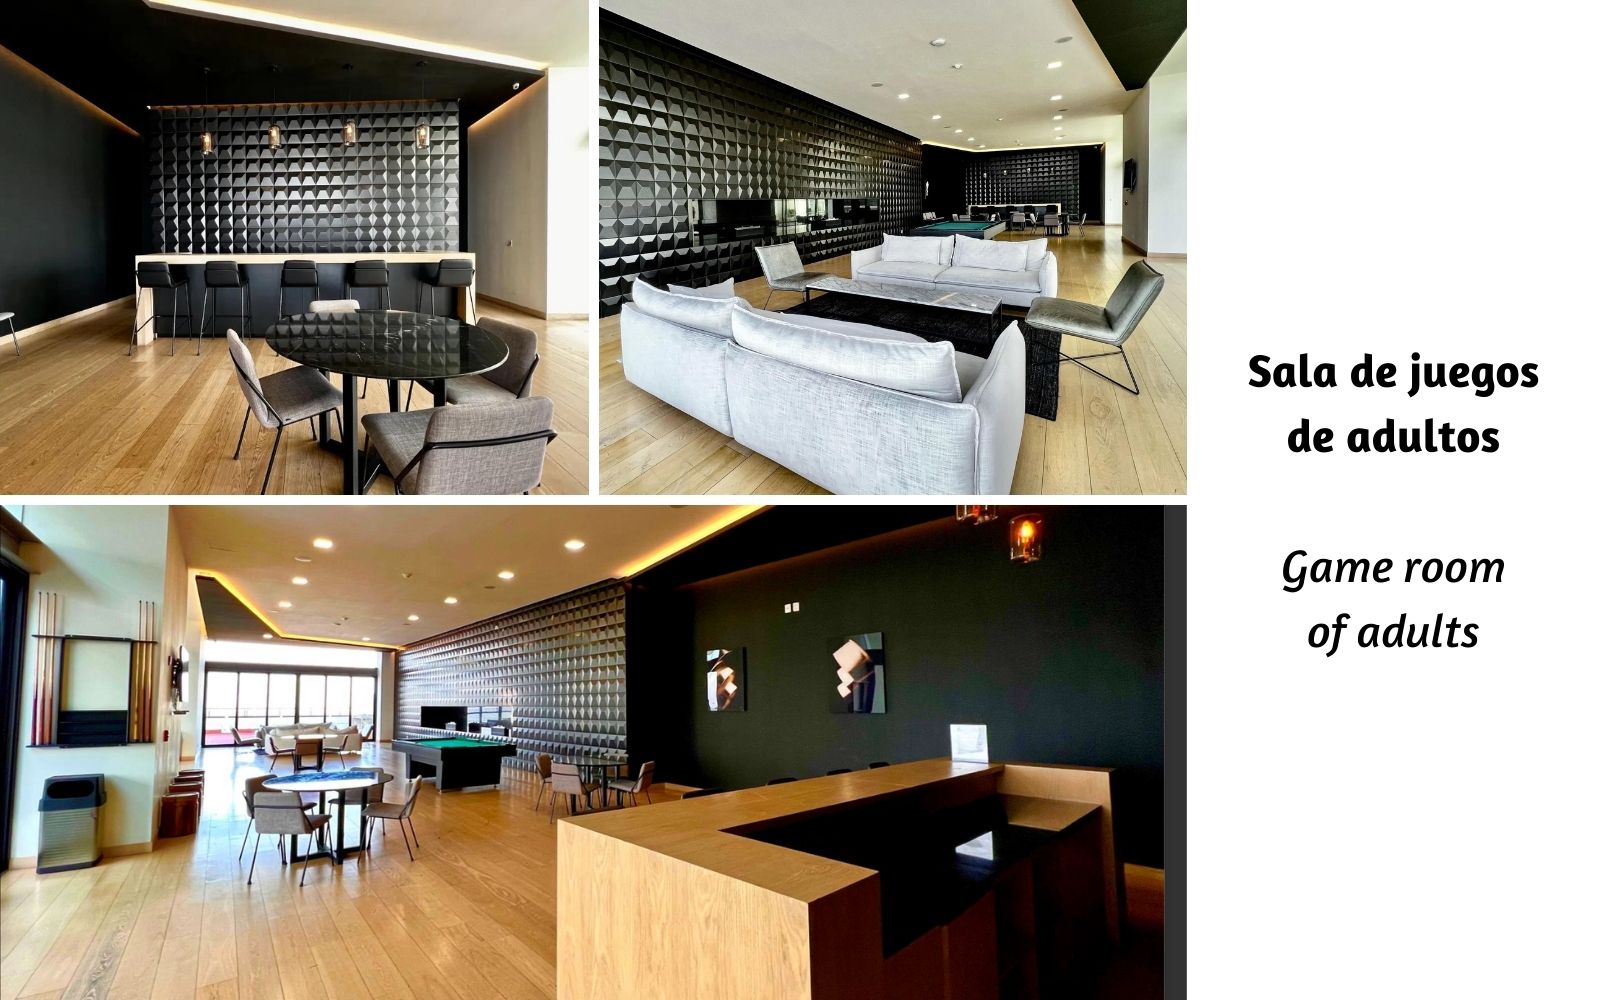 Two-story condominium with pool, social event room, terrace on the top floor, Santa Fe, for sale, CDMX.